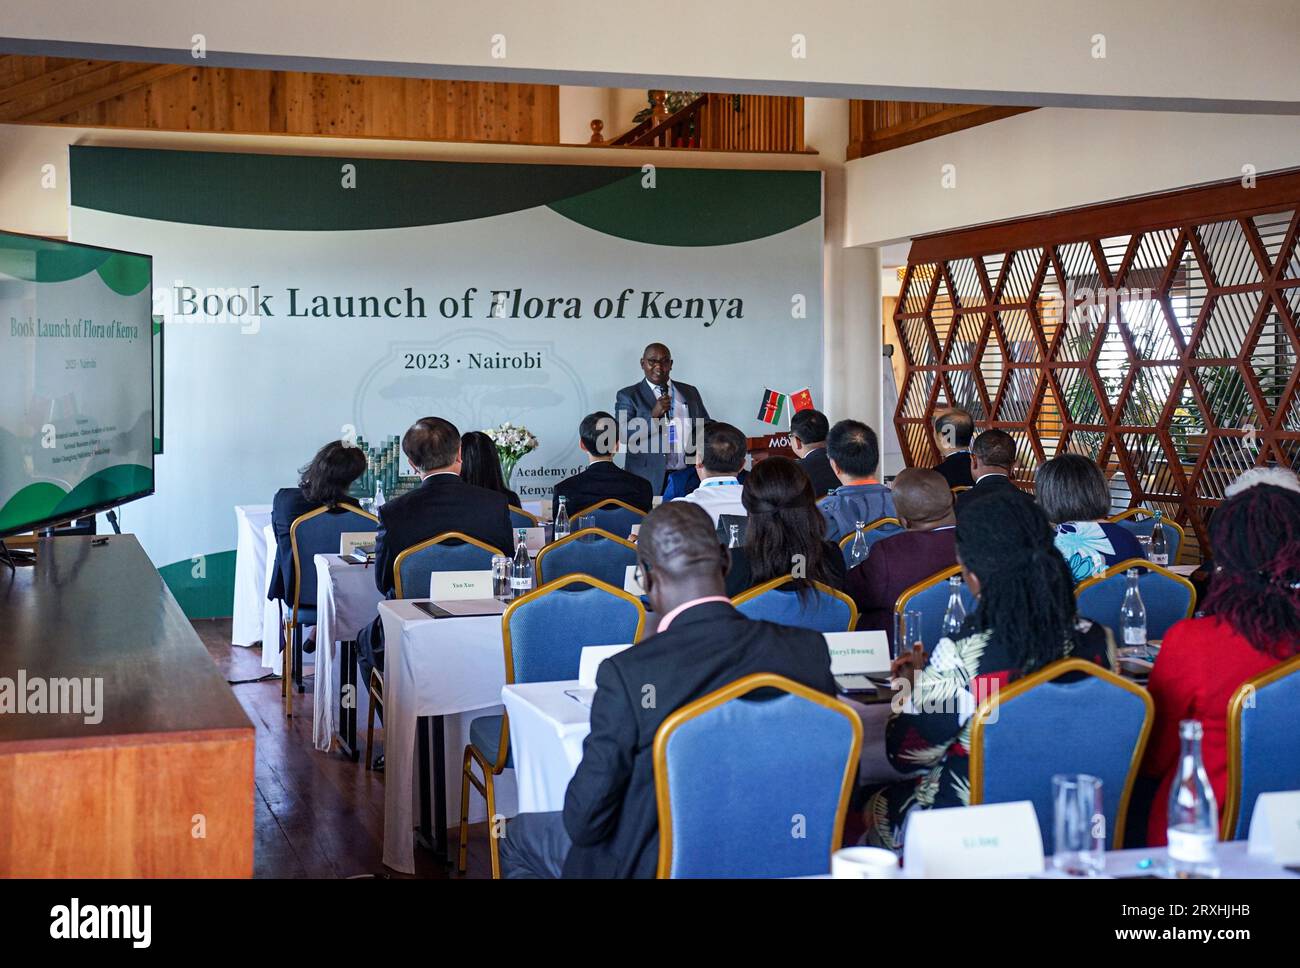 (230925) -- NAIROBI, Sept. 25, 2023 (Xinhua) -- People attend a book launch of the 23rd volume 'Rubiaceae' of the Flora of Kenya in Nairobi, Kenya, on Sept. 25, 2023. Scientists from China and Kenya on Monday launched a volume of the Flora of Kenya in Nairobi, marking the publication of Kenya's first national flora and filling the gap in the field of plant resources research in the country. The Flora of Kenya, which is divided into 31 volumes, will document the East African nation's nearly 7,000 plant species from 223 families. The 23rd volume, 'Rubiaceae,' is the first part of the project tha Stock Photo